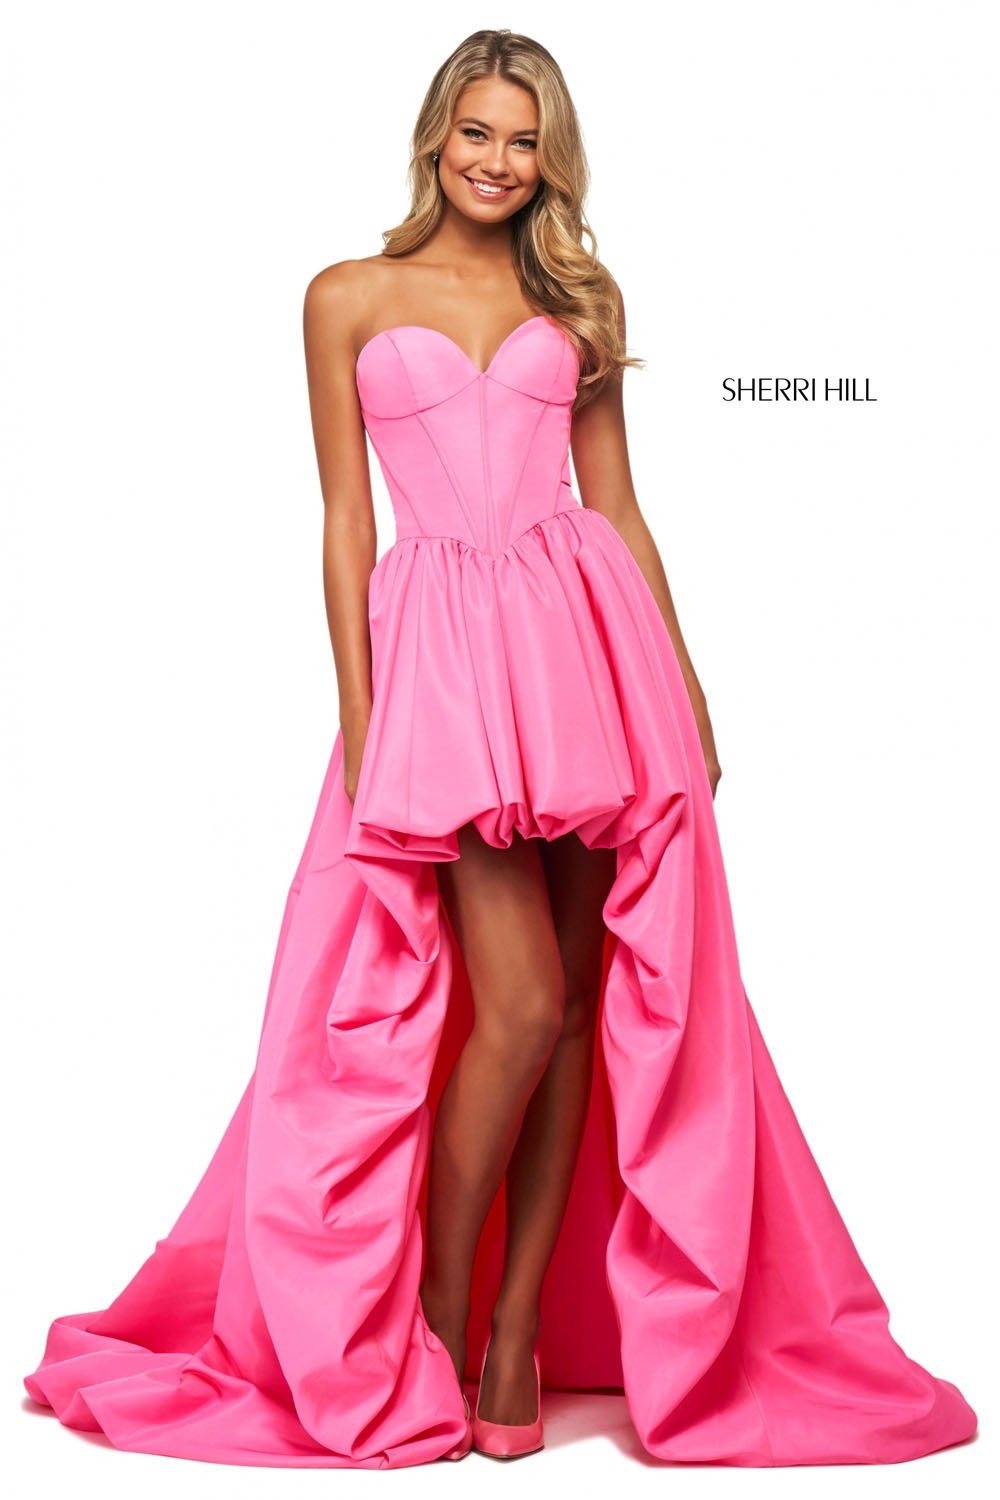 Sherri Hill 53719 dress images in these colors: Aqua, Yellow, Bright Pink, Fuchsia, Lilac, Red, Black.